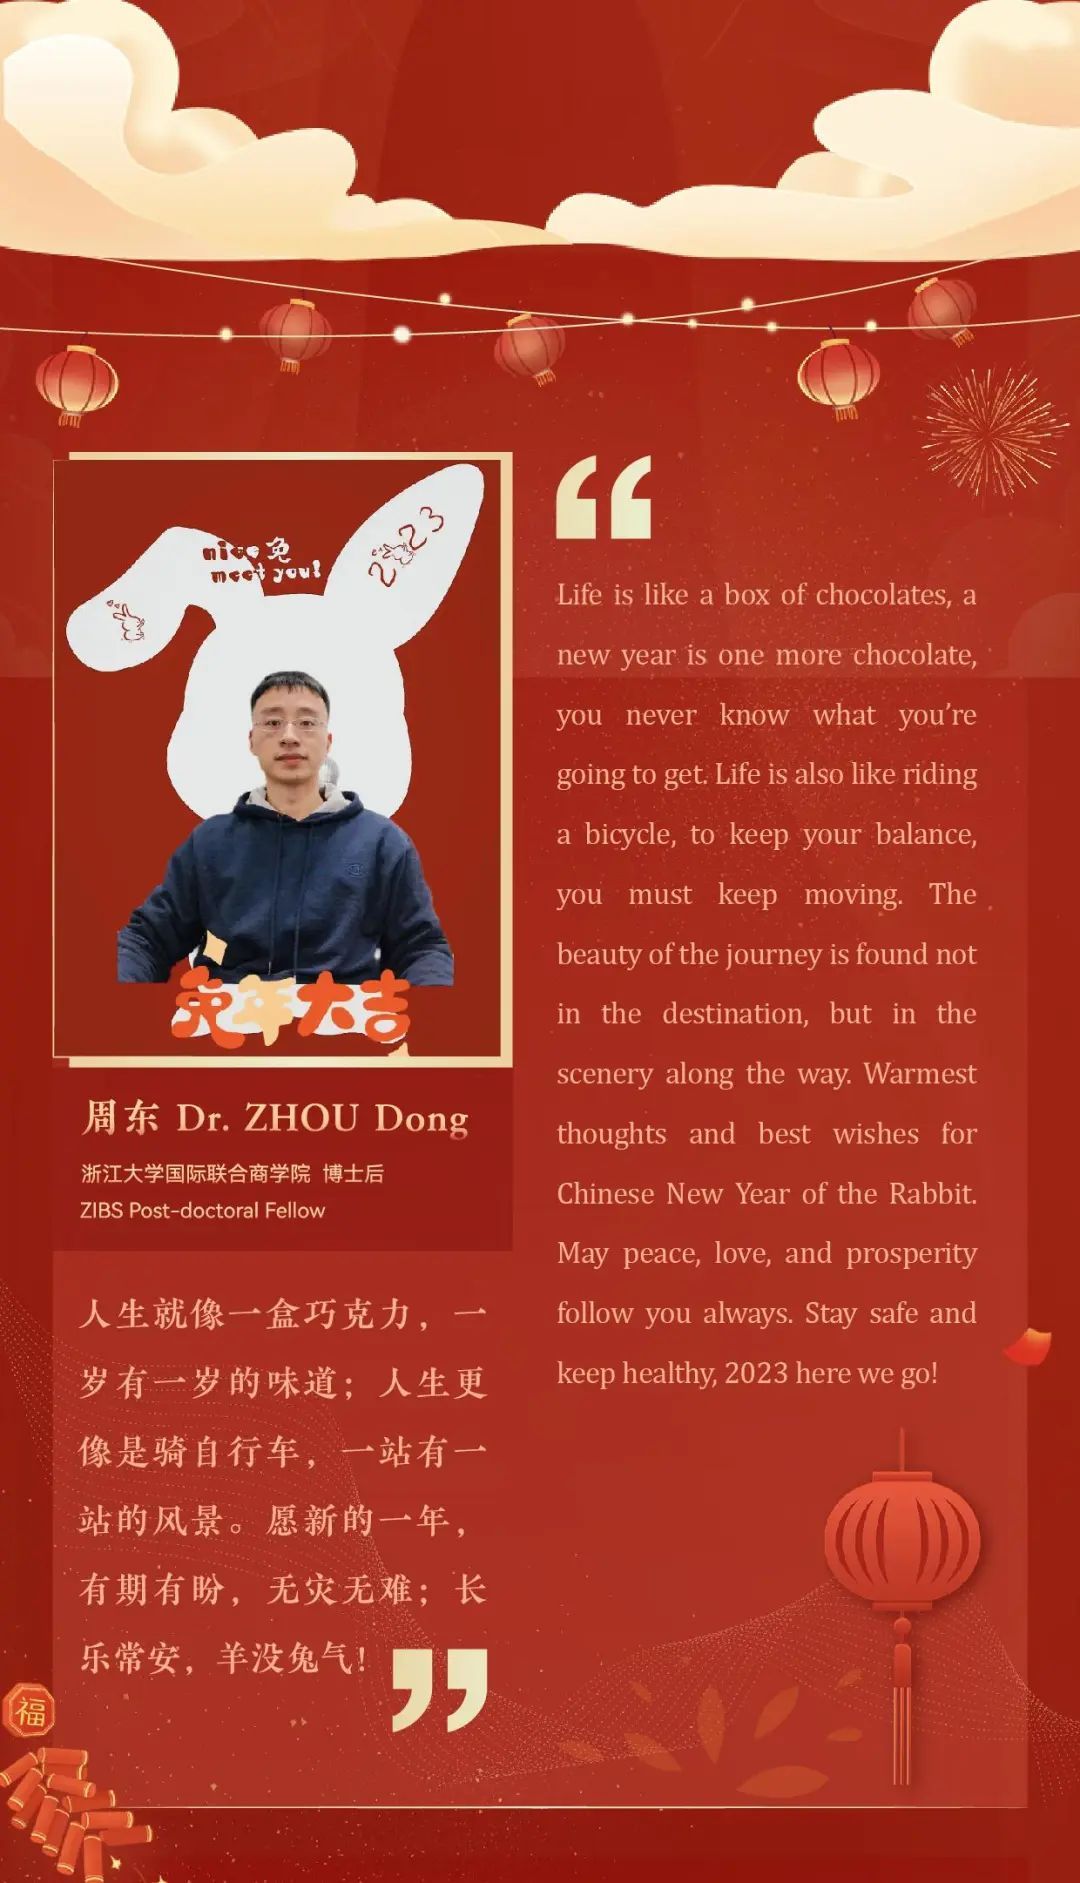 Wishes of ZIBSers born in the year of the Rabbit